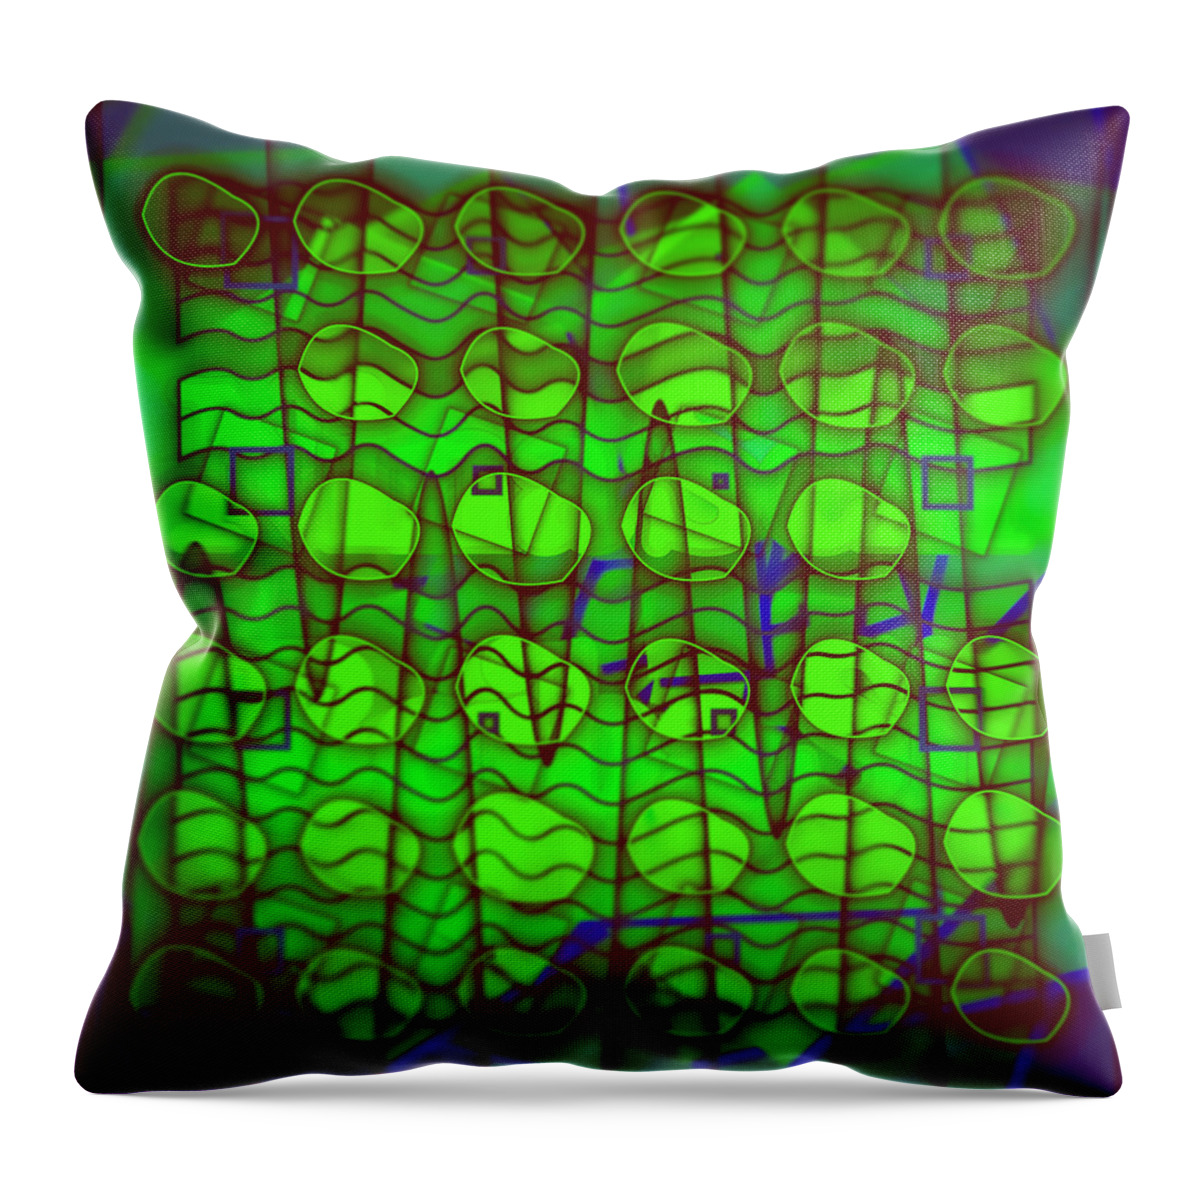 Abstract Throw Pillow featuring the digital art Pattern 25 by Marko Sabotin